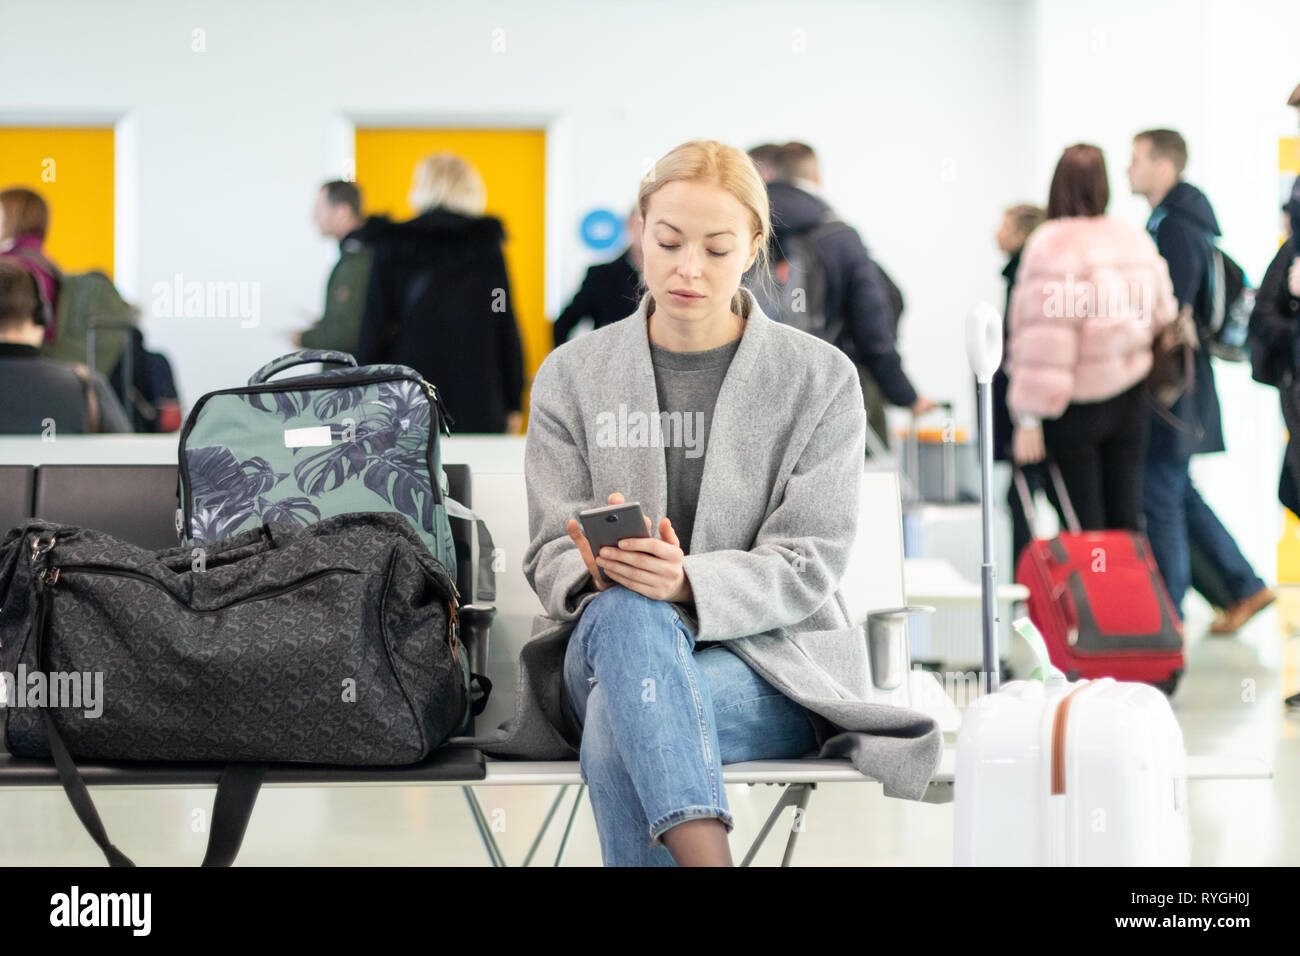 Female traveler using her cell phone while waiting to board a plane at departure gates at airport terminal. Stock Photo